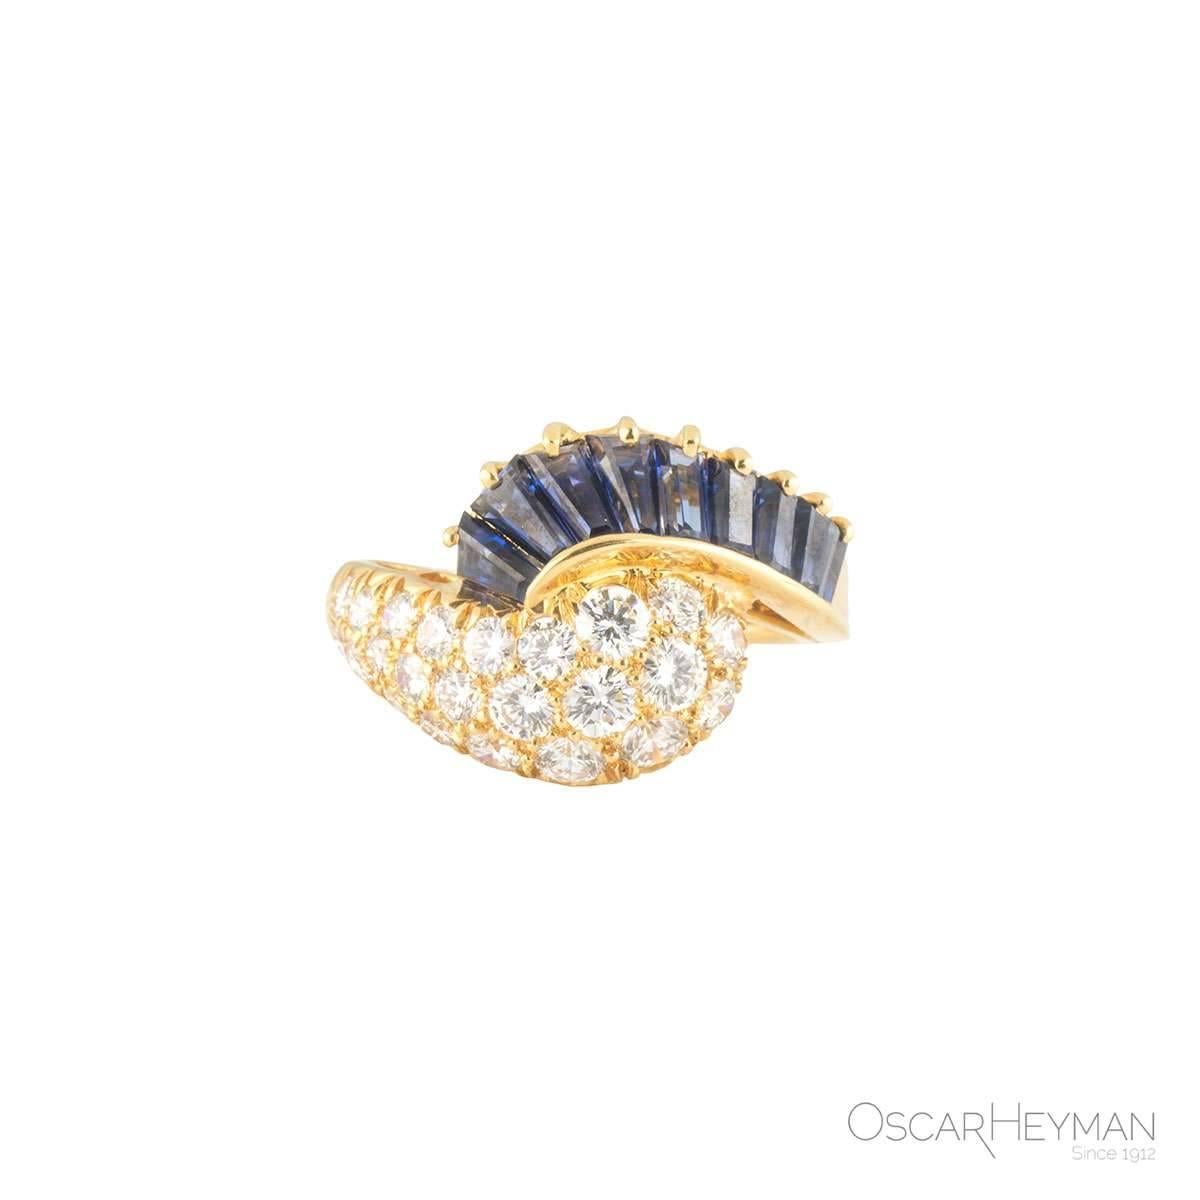 A beautiful 18k yellow gold Oscar Heyman diamond and sapphire ring. The ring comprises of 9 tapered baguette cut and emerald cut sapphires with a total weight of 1.35ct. Complimenting the sapphires are 23 round brilliant cut diamonds tappering in